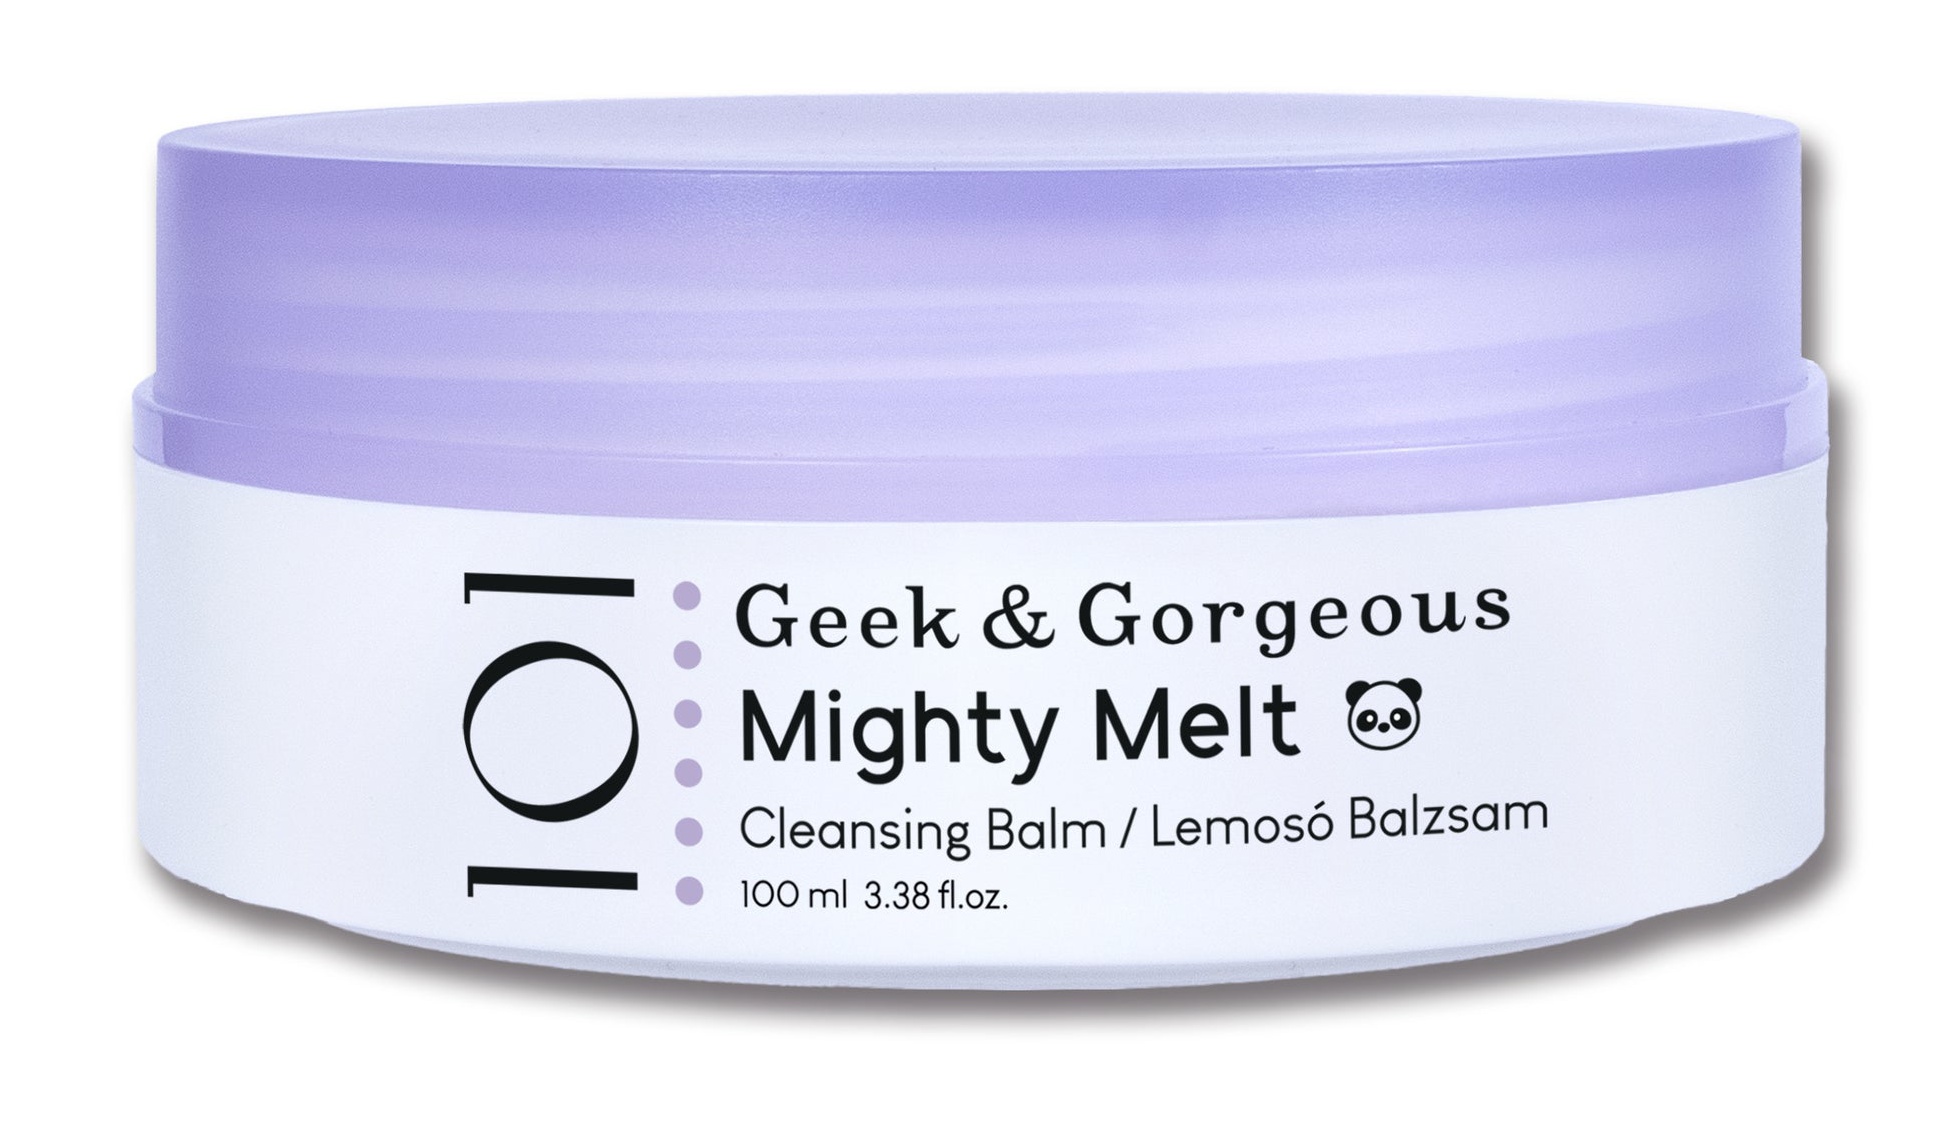 Geek and Gorgeous Mighty Melt Cleansing Balm